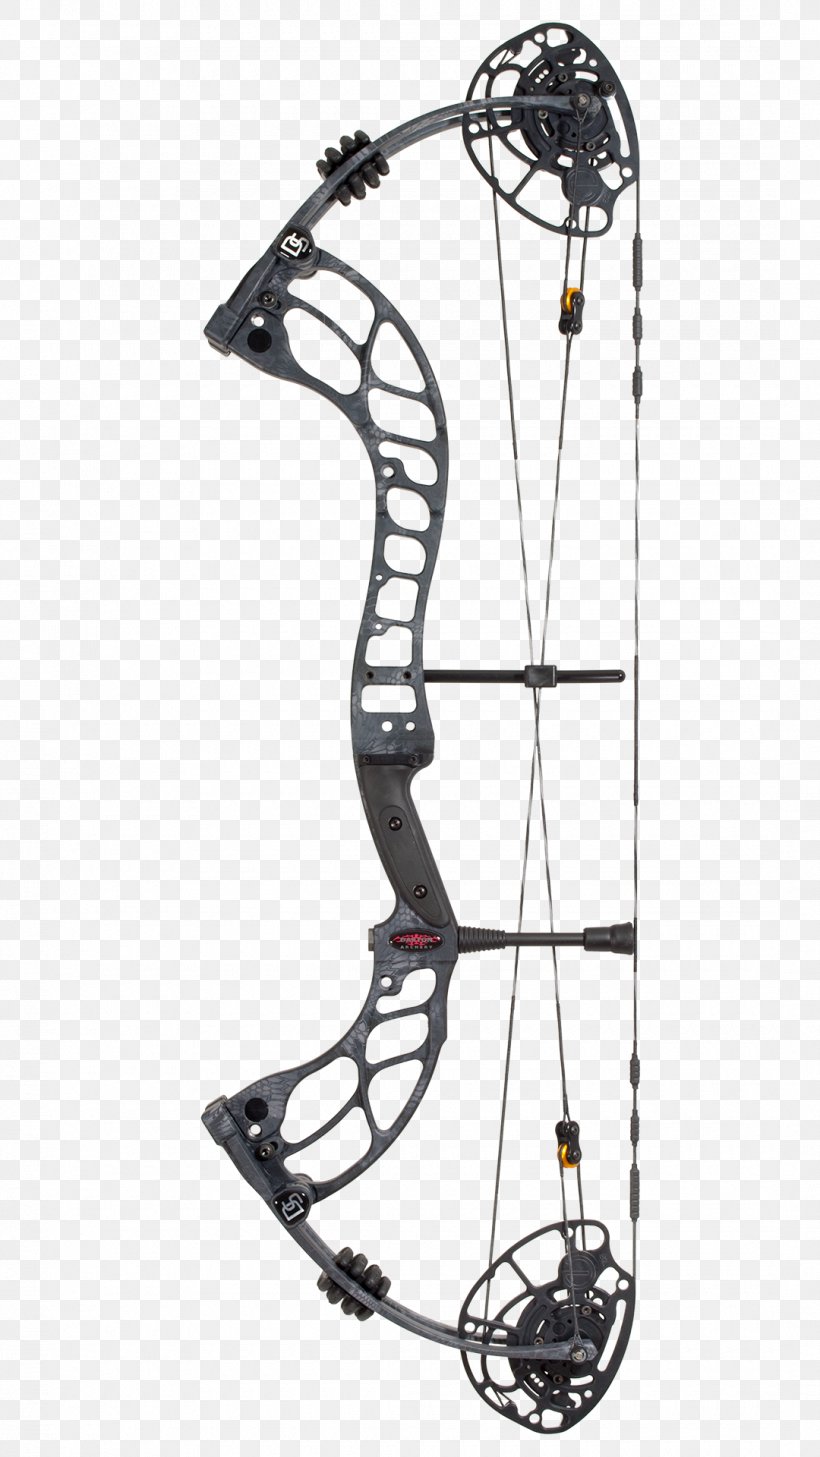 Compound Bows Bow And Arrow Darton Archery Manufacturing Bowhunting, PNG, 1080x1920px, Compound Bows, Archery, Bow, Bow And Arrow, Bowhunting Download Free